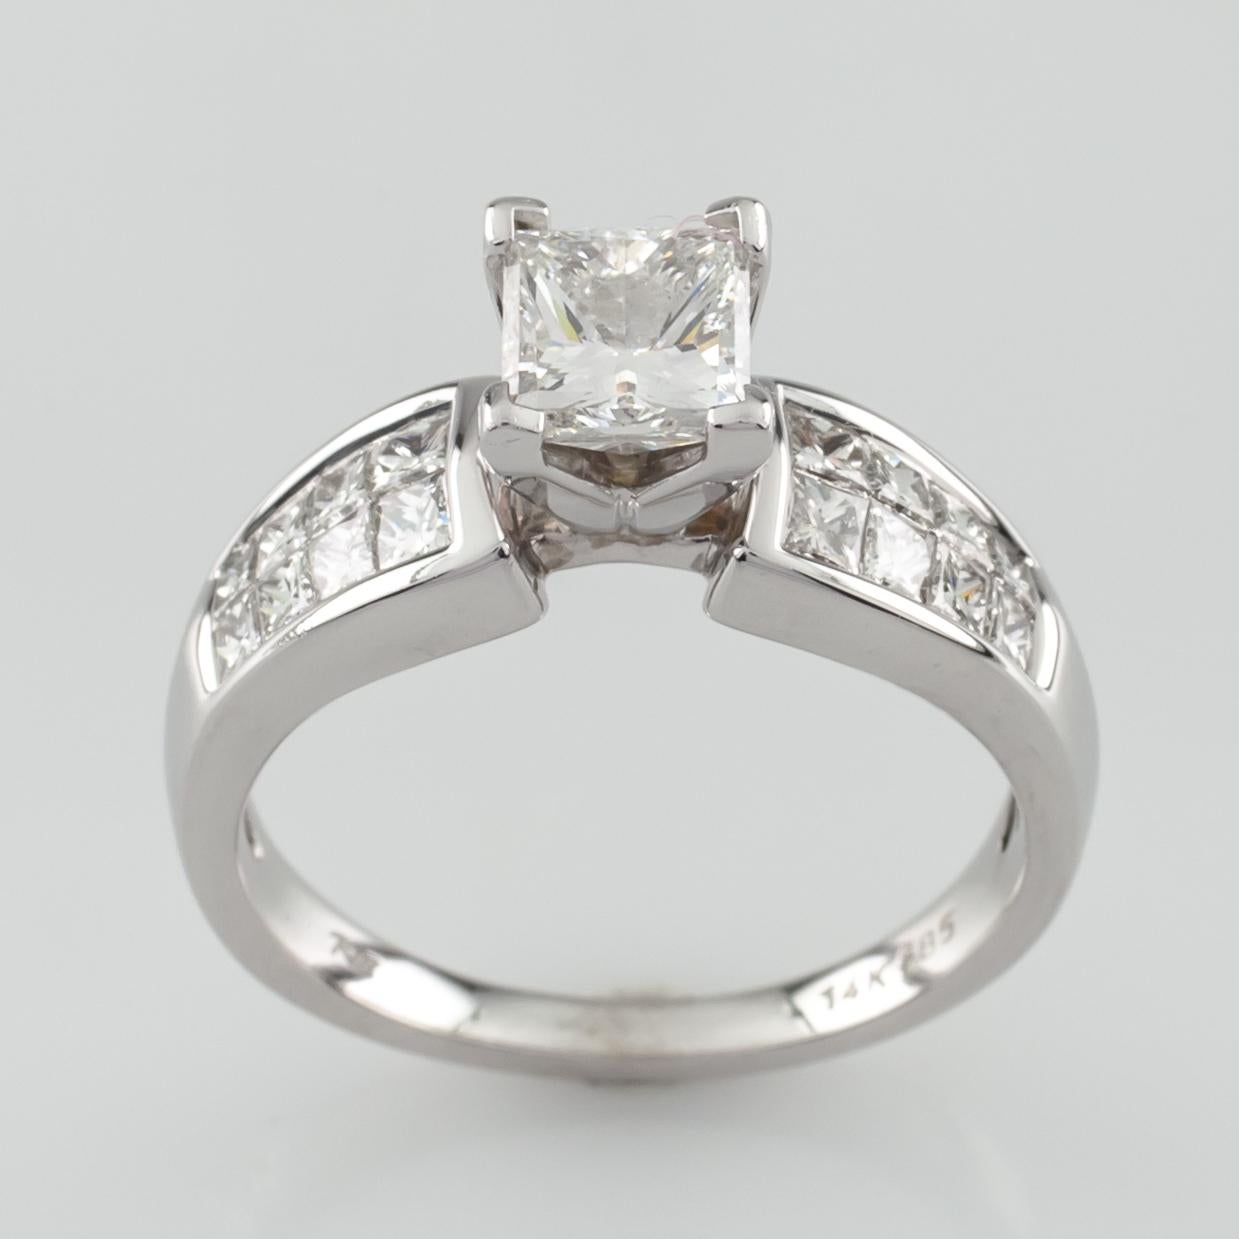 Gorgeous Princess cut engagement ring with Princess cut accent stones
Ring Size 7
Total Mass = 5.3 grams
Center Stone Details:
Cut: Princess
Size: 1.0 Carats
Color: H
Clarity: SI2
Accent stones are princess cut (2 rows of 4 diamonds on each side of